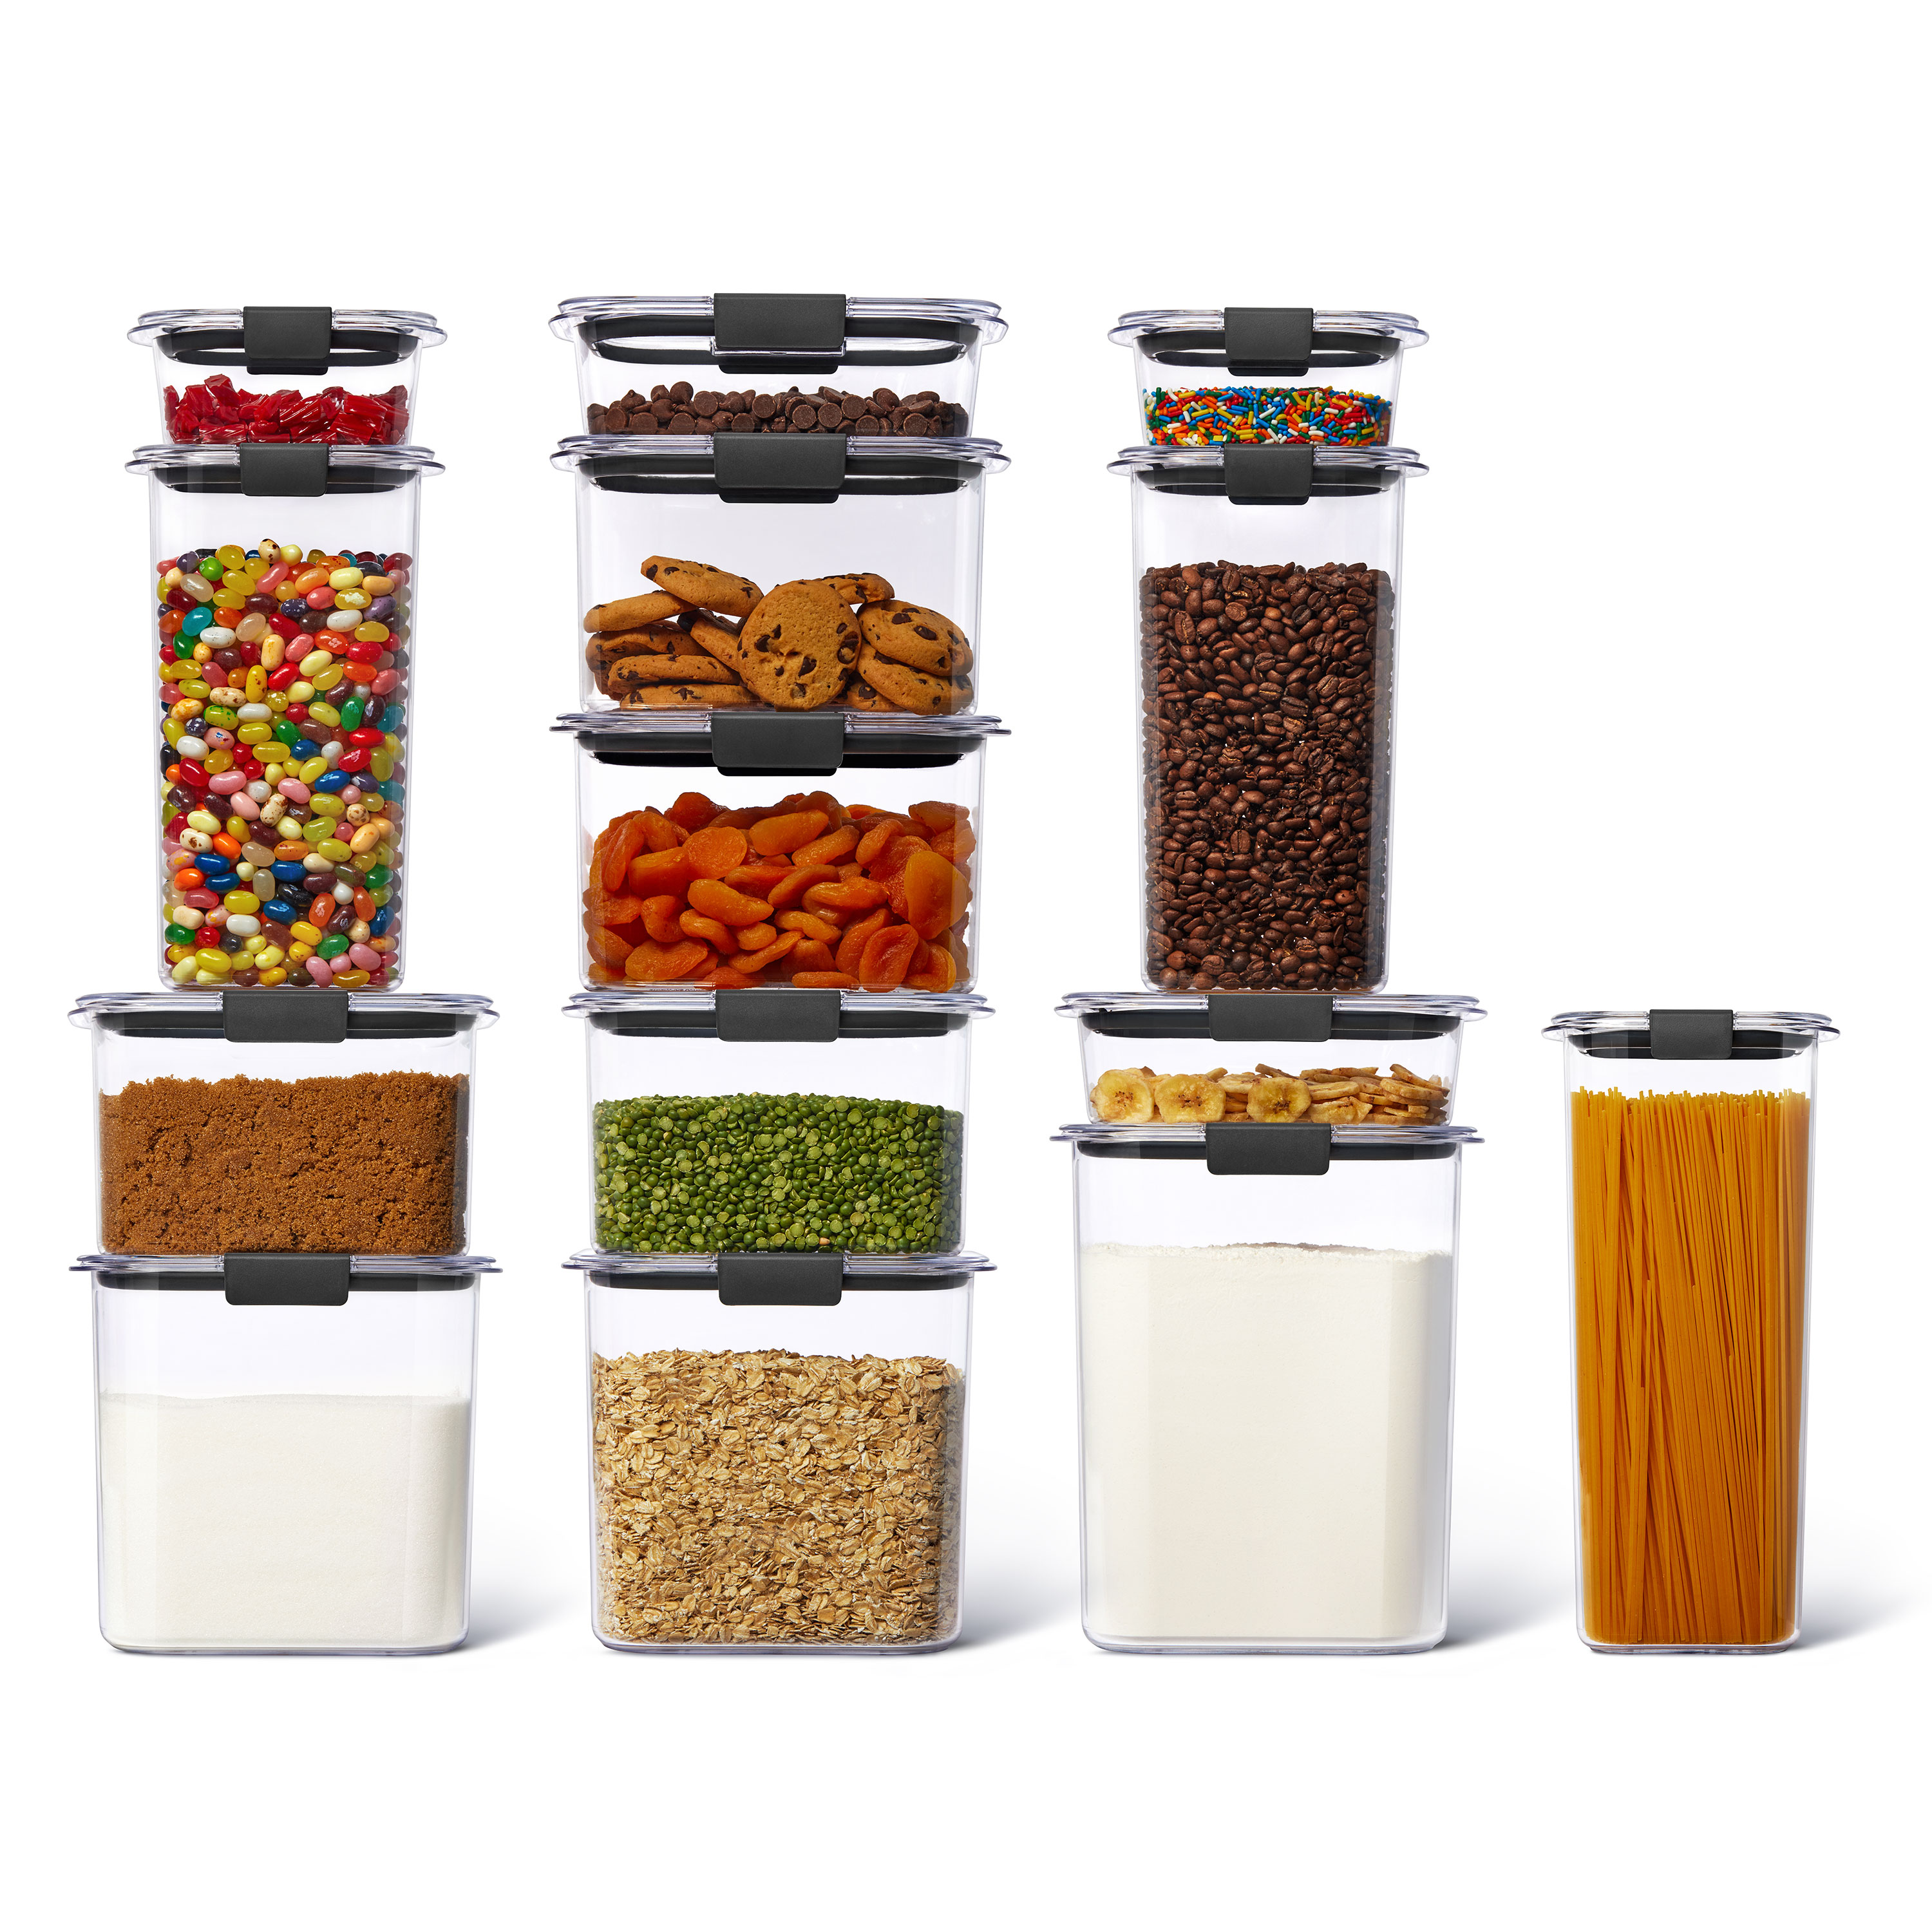 Rubbermaid Brilliance Tritan Plastic Food Storage Pantry Set of 14 Containers with Lids (28 Pieces Total) - image 1 of 7